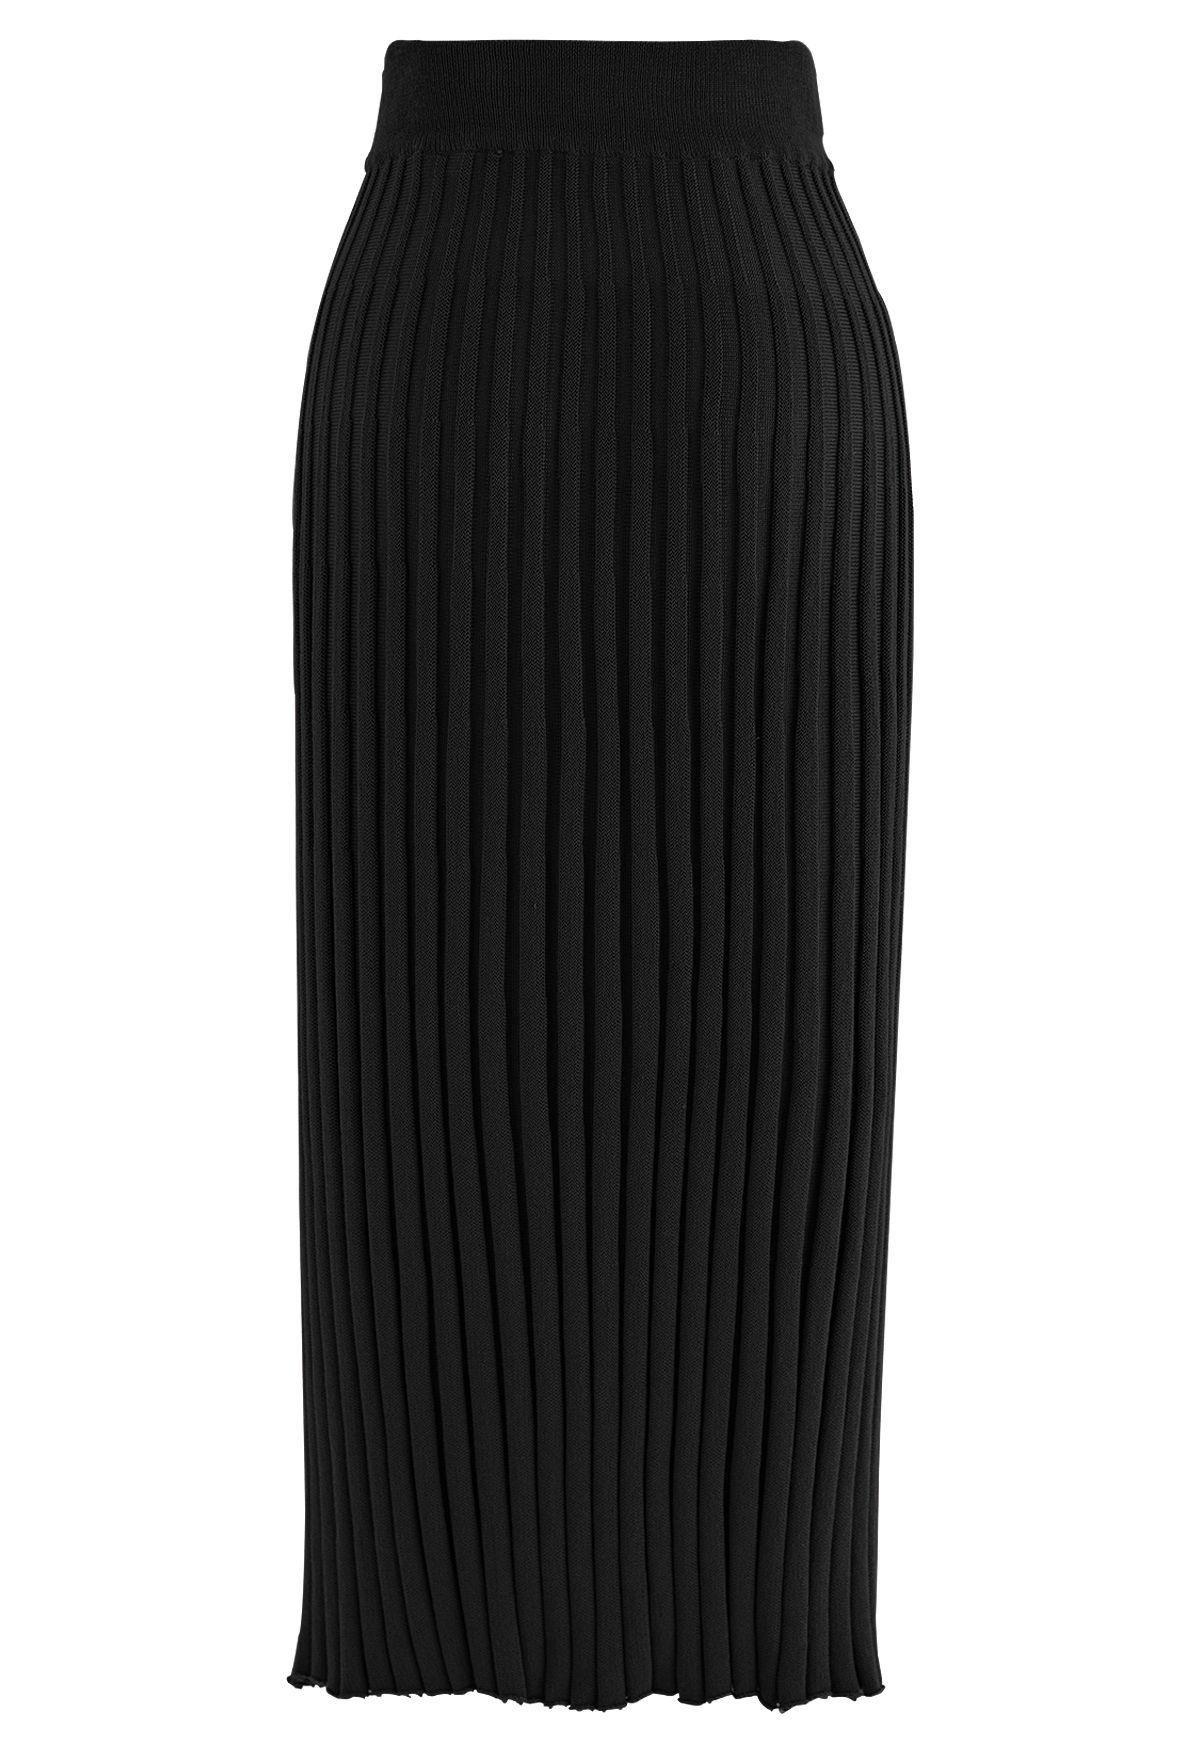 Buttoned Front Slit Rib Knit Skirt in Black - Retro, Indie and Unique ...